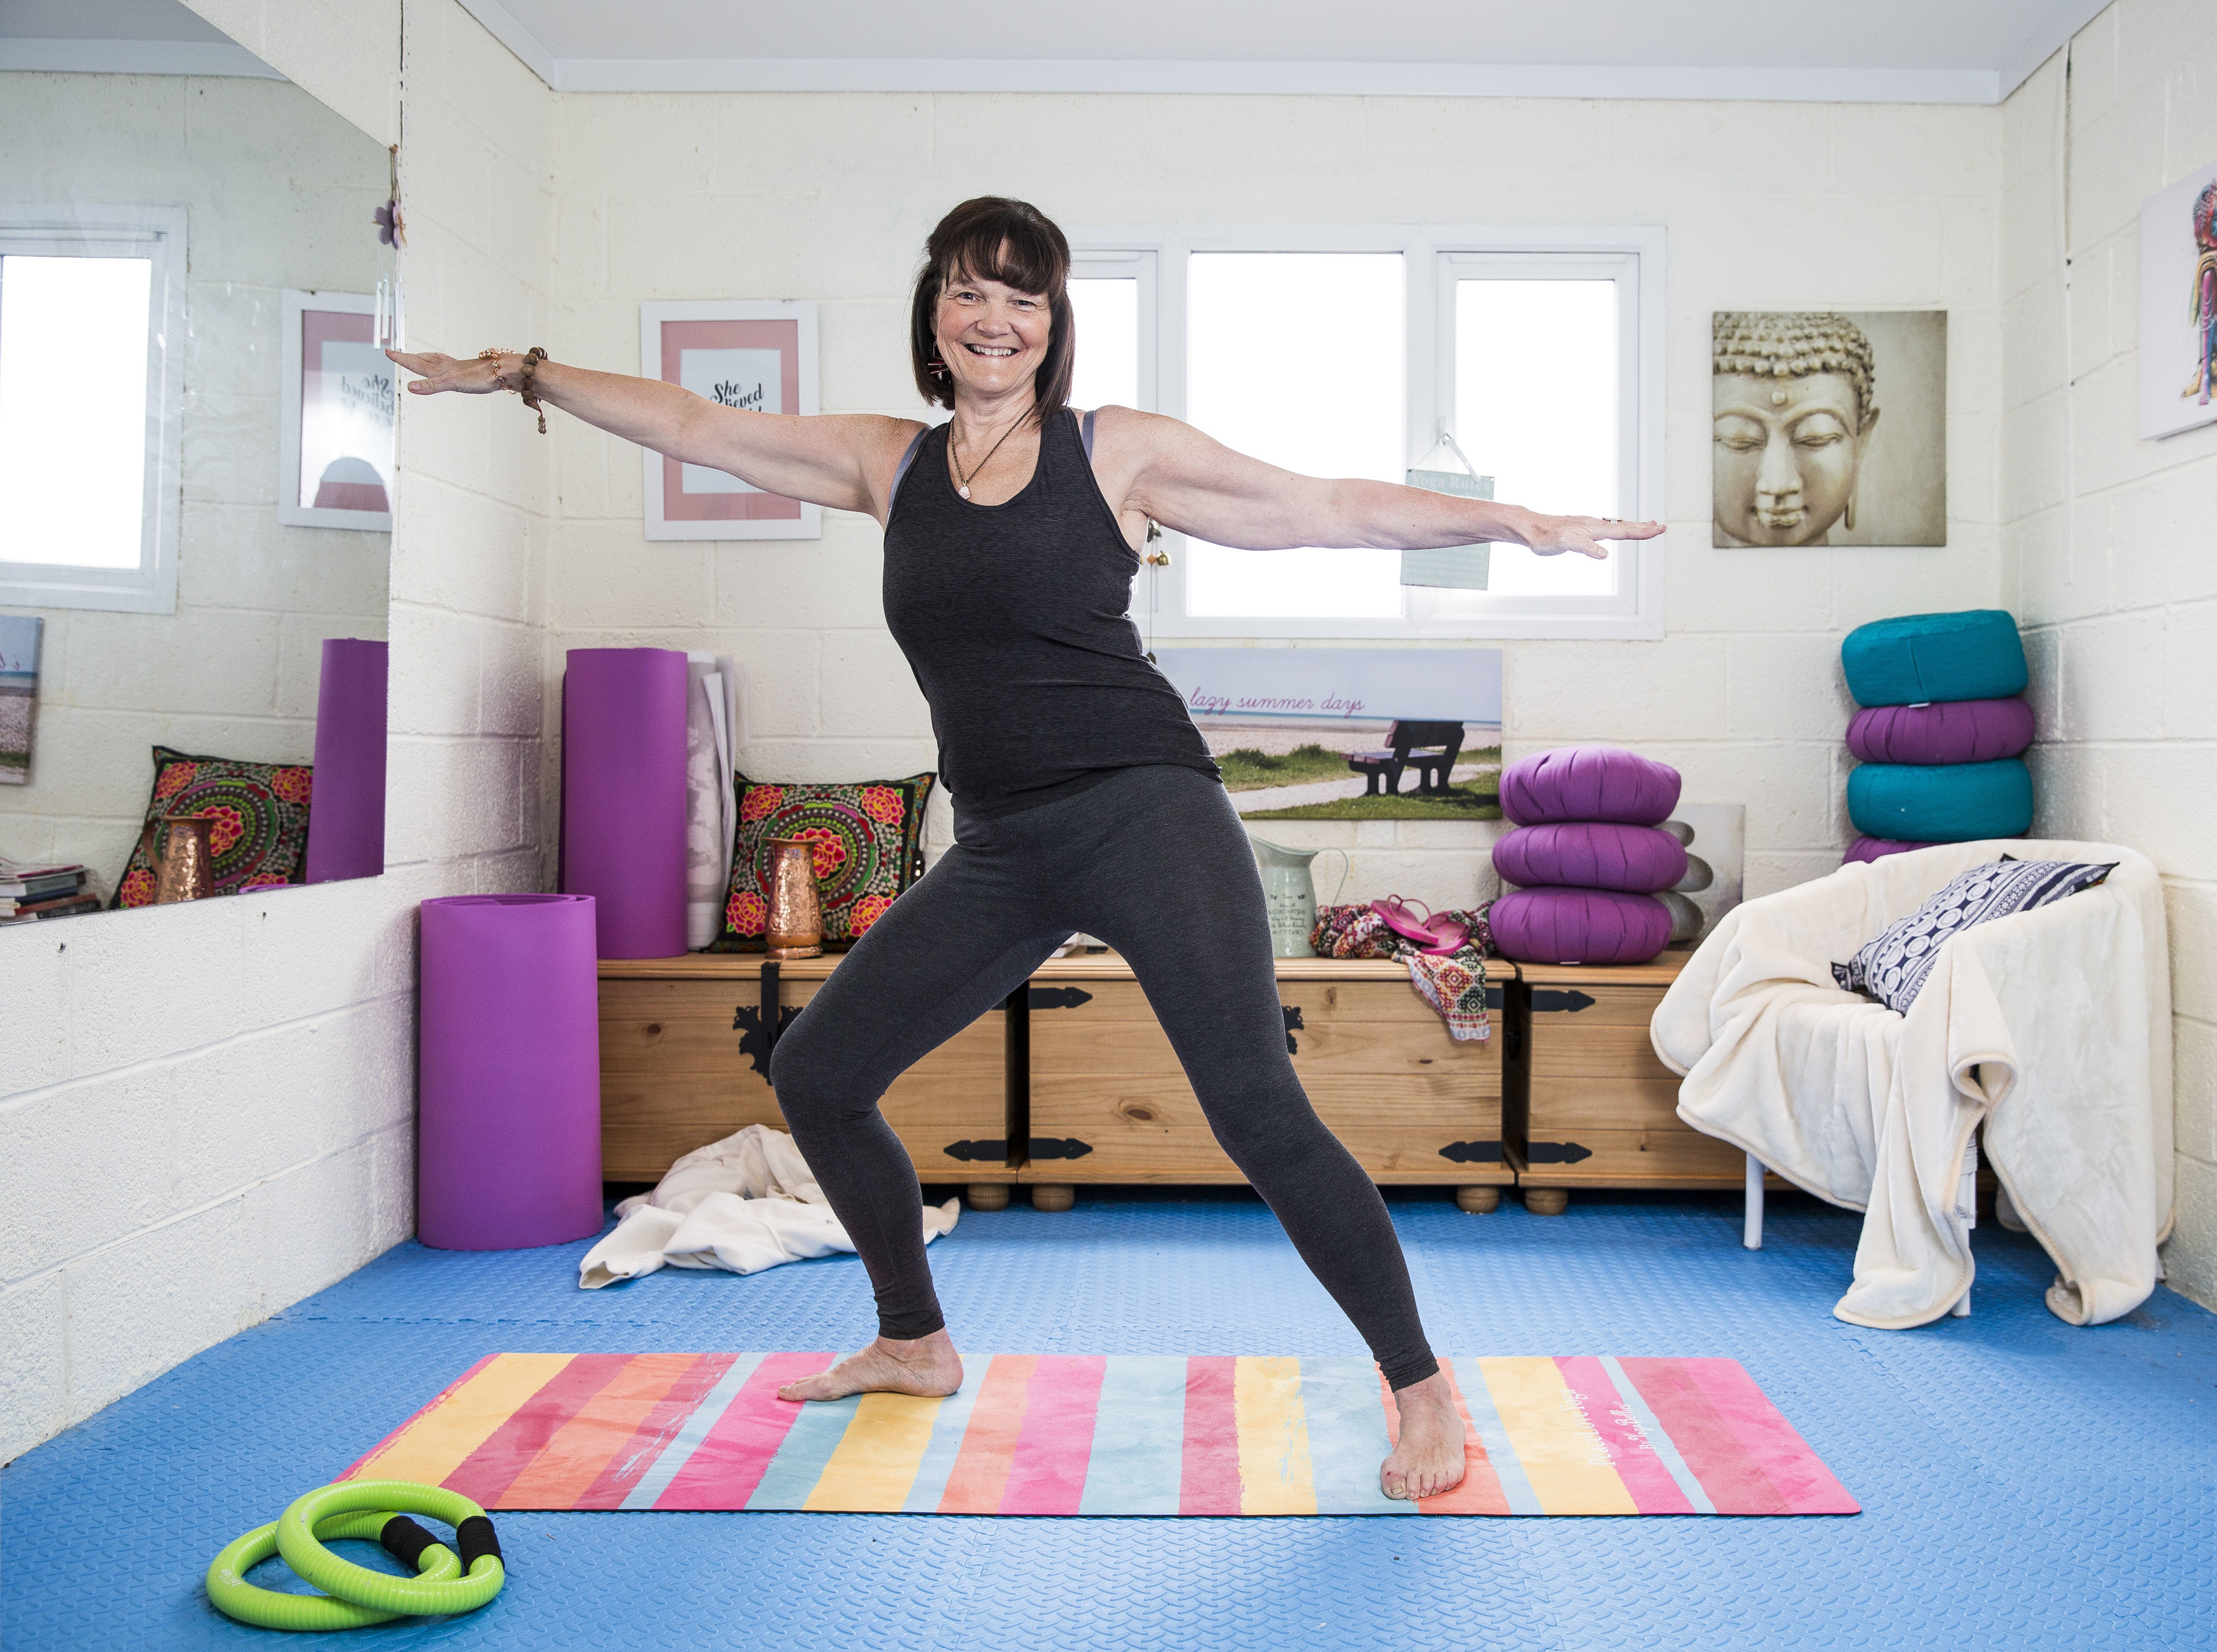 Angela Edwards has Parkinson's and has been doing yoga to relieve the symptoms (Jamie Williamson)